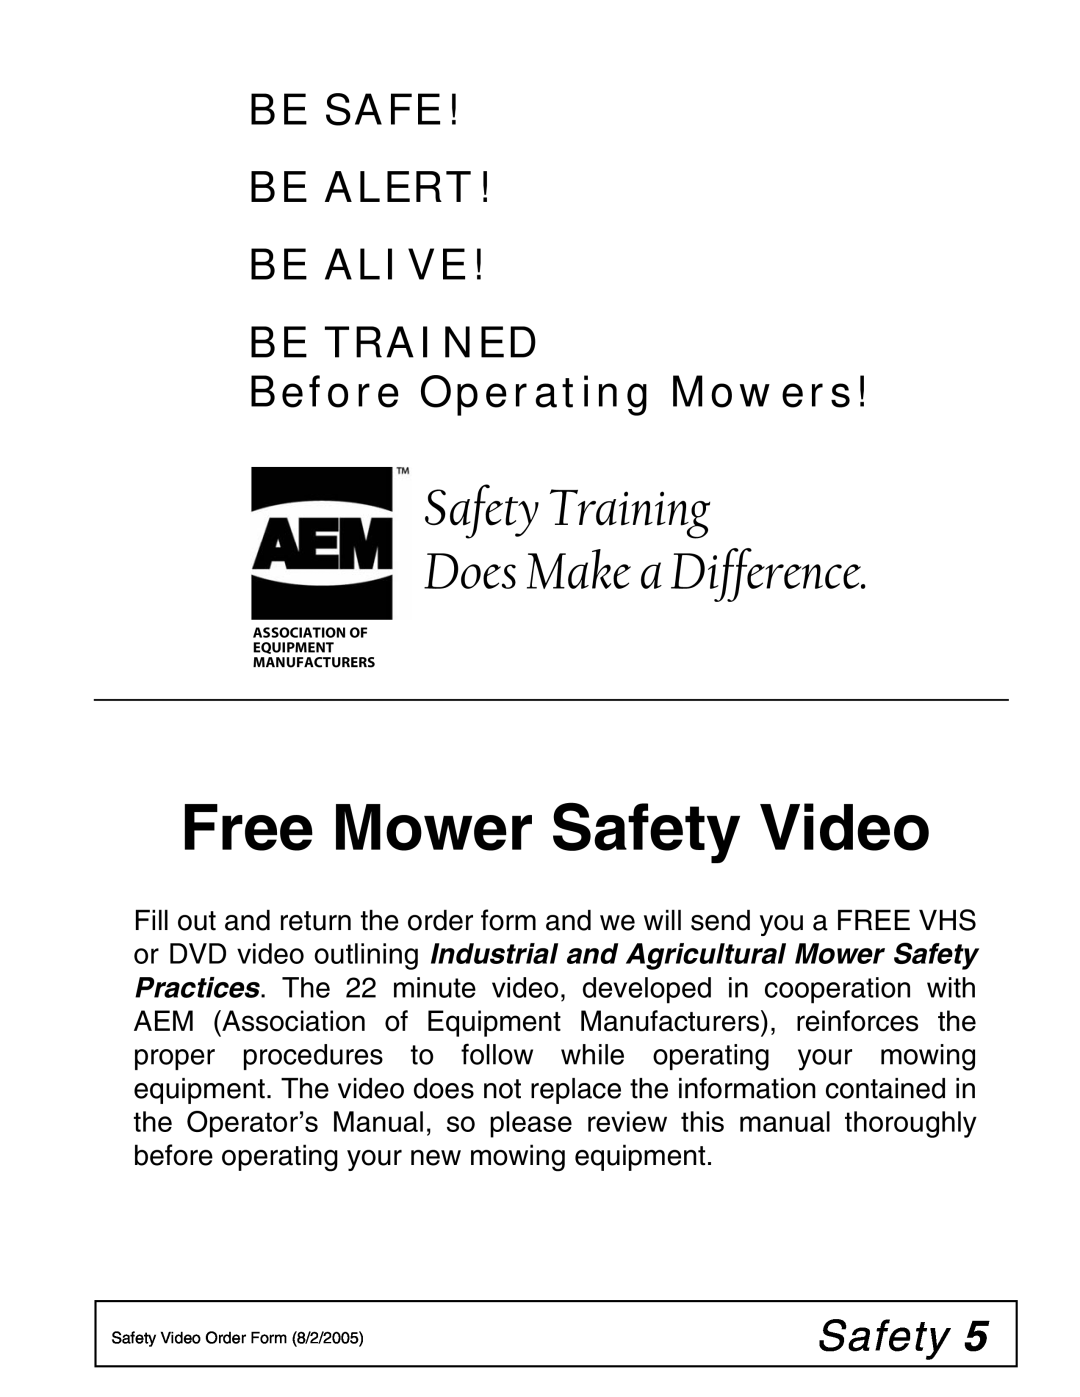 Woods Equipment BW240HDQ manual Free Mower Safety Video, Safety Training Does Make a Difference 